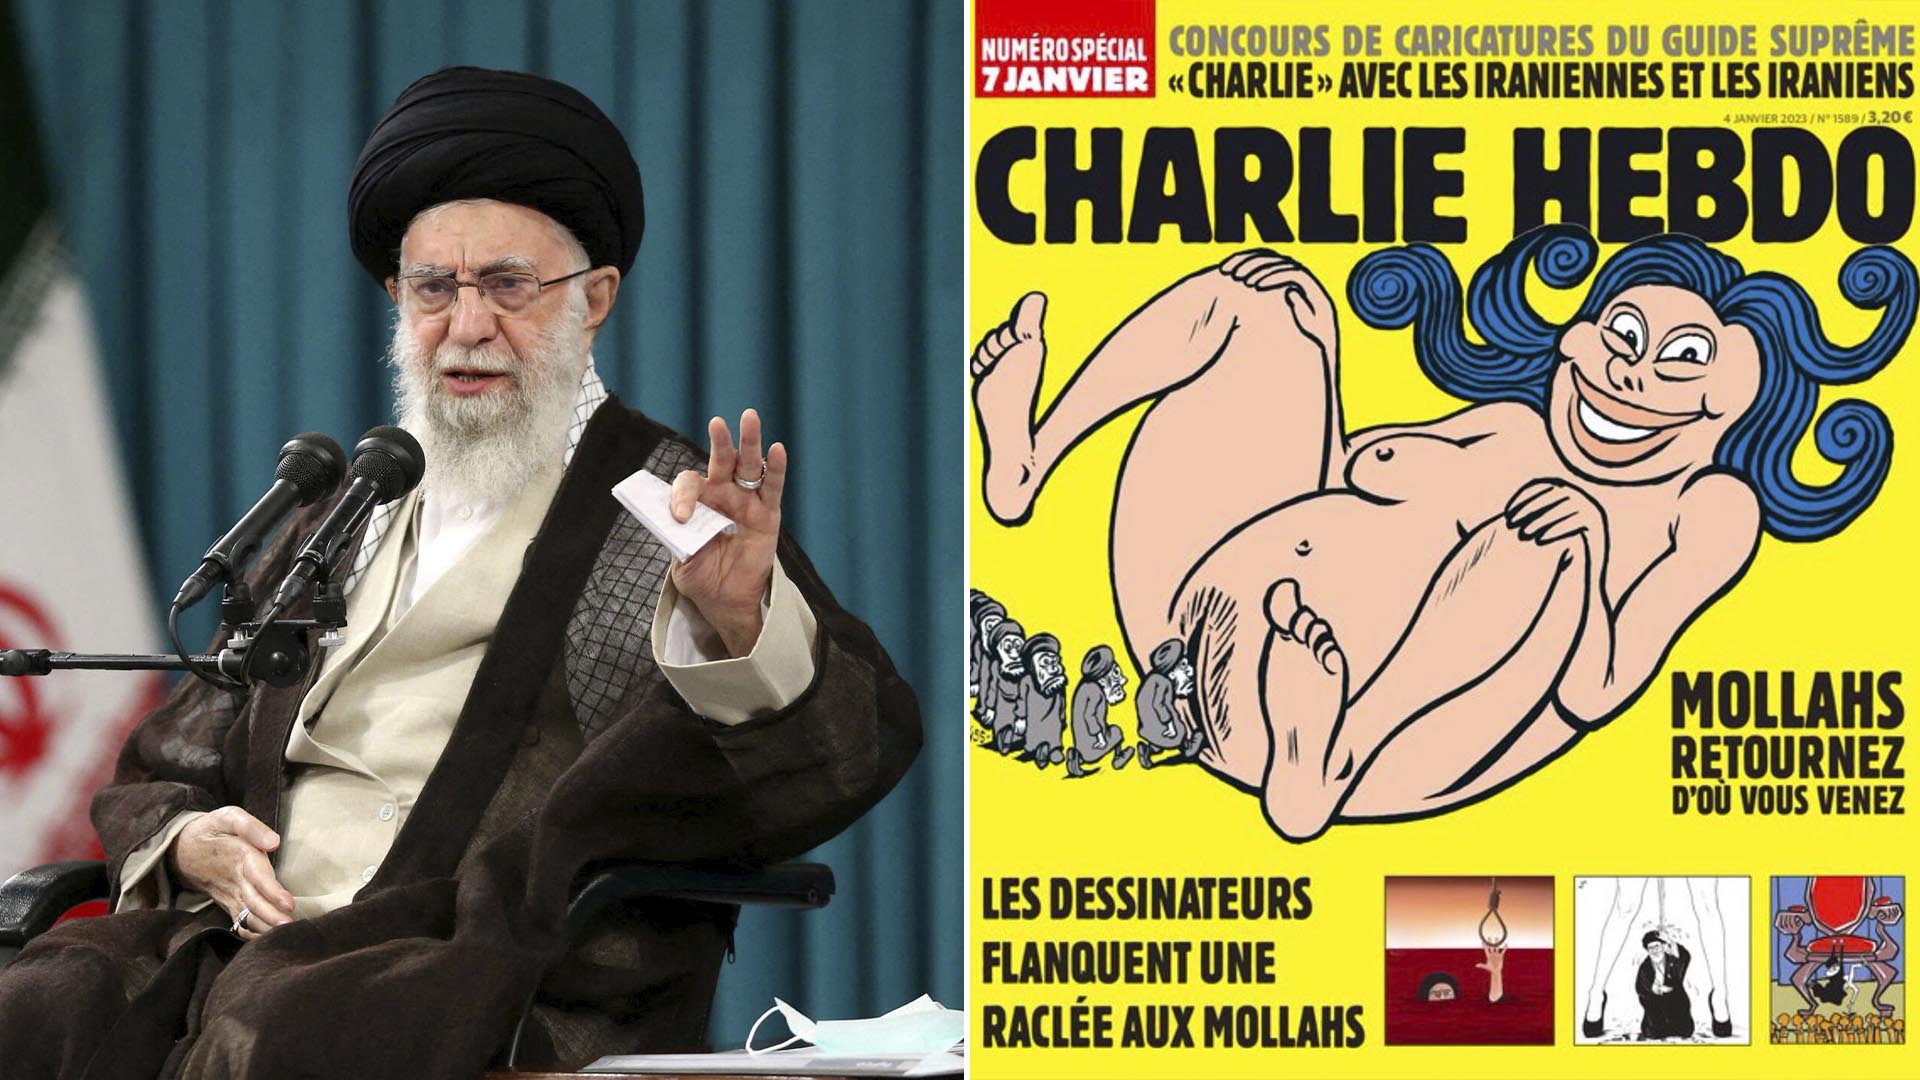 Ali Khamenei and the cover of the latest issue of Charlie Hebdo